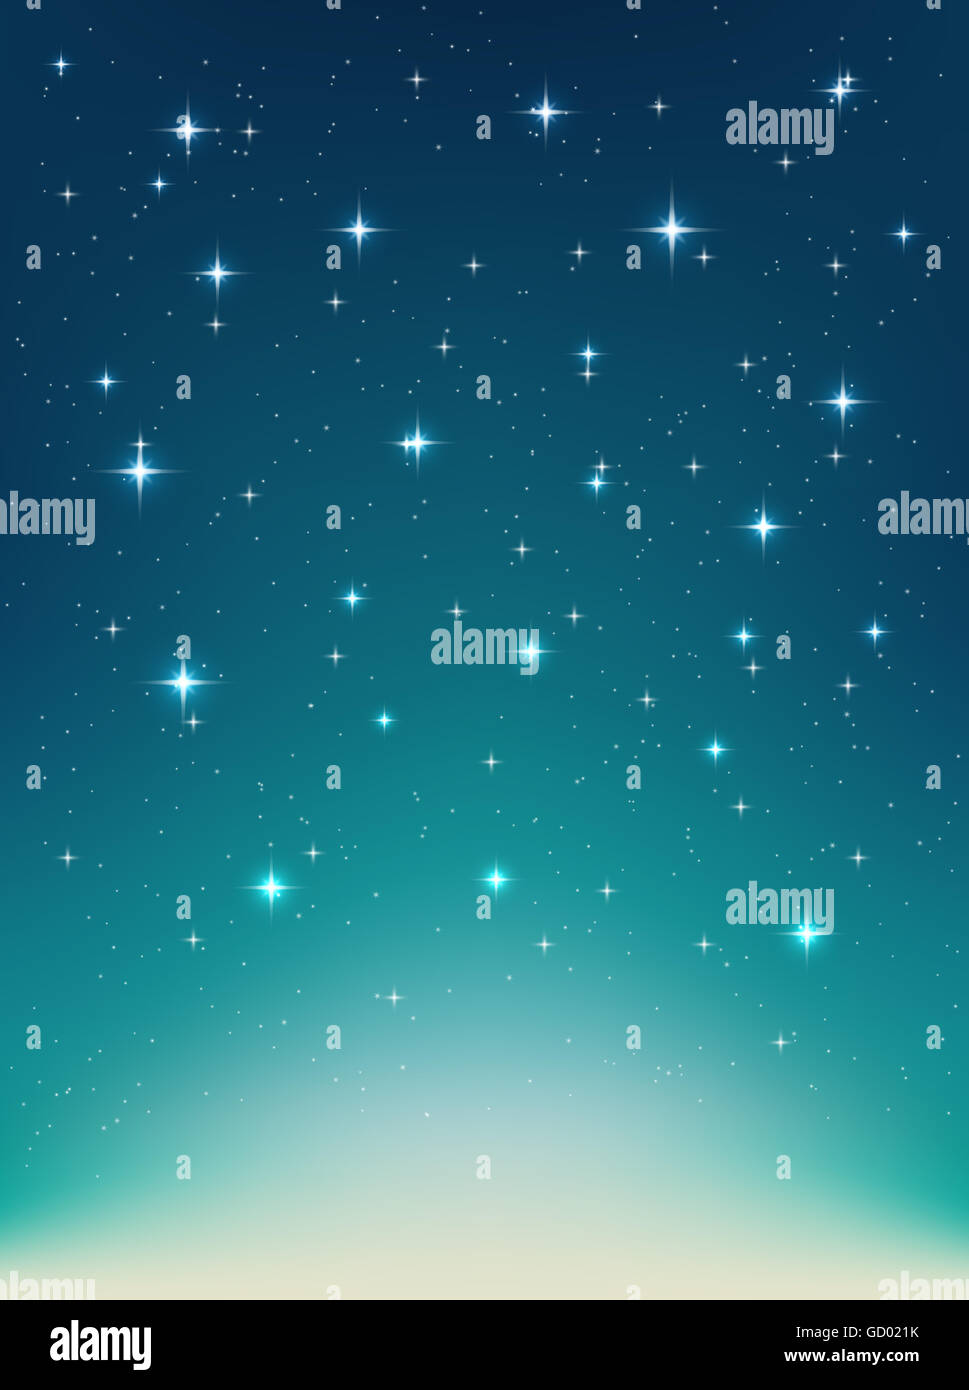 background with night, stars in the sky, shining light. Abstract natural  background with stars for Your design project. Stock Photo